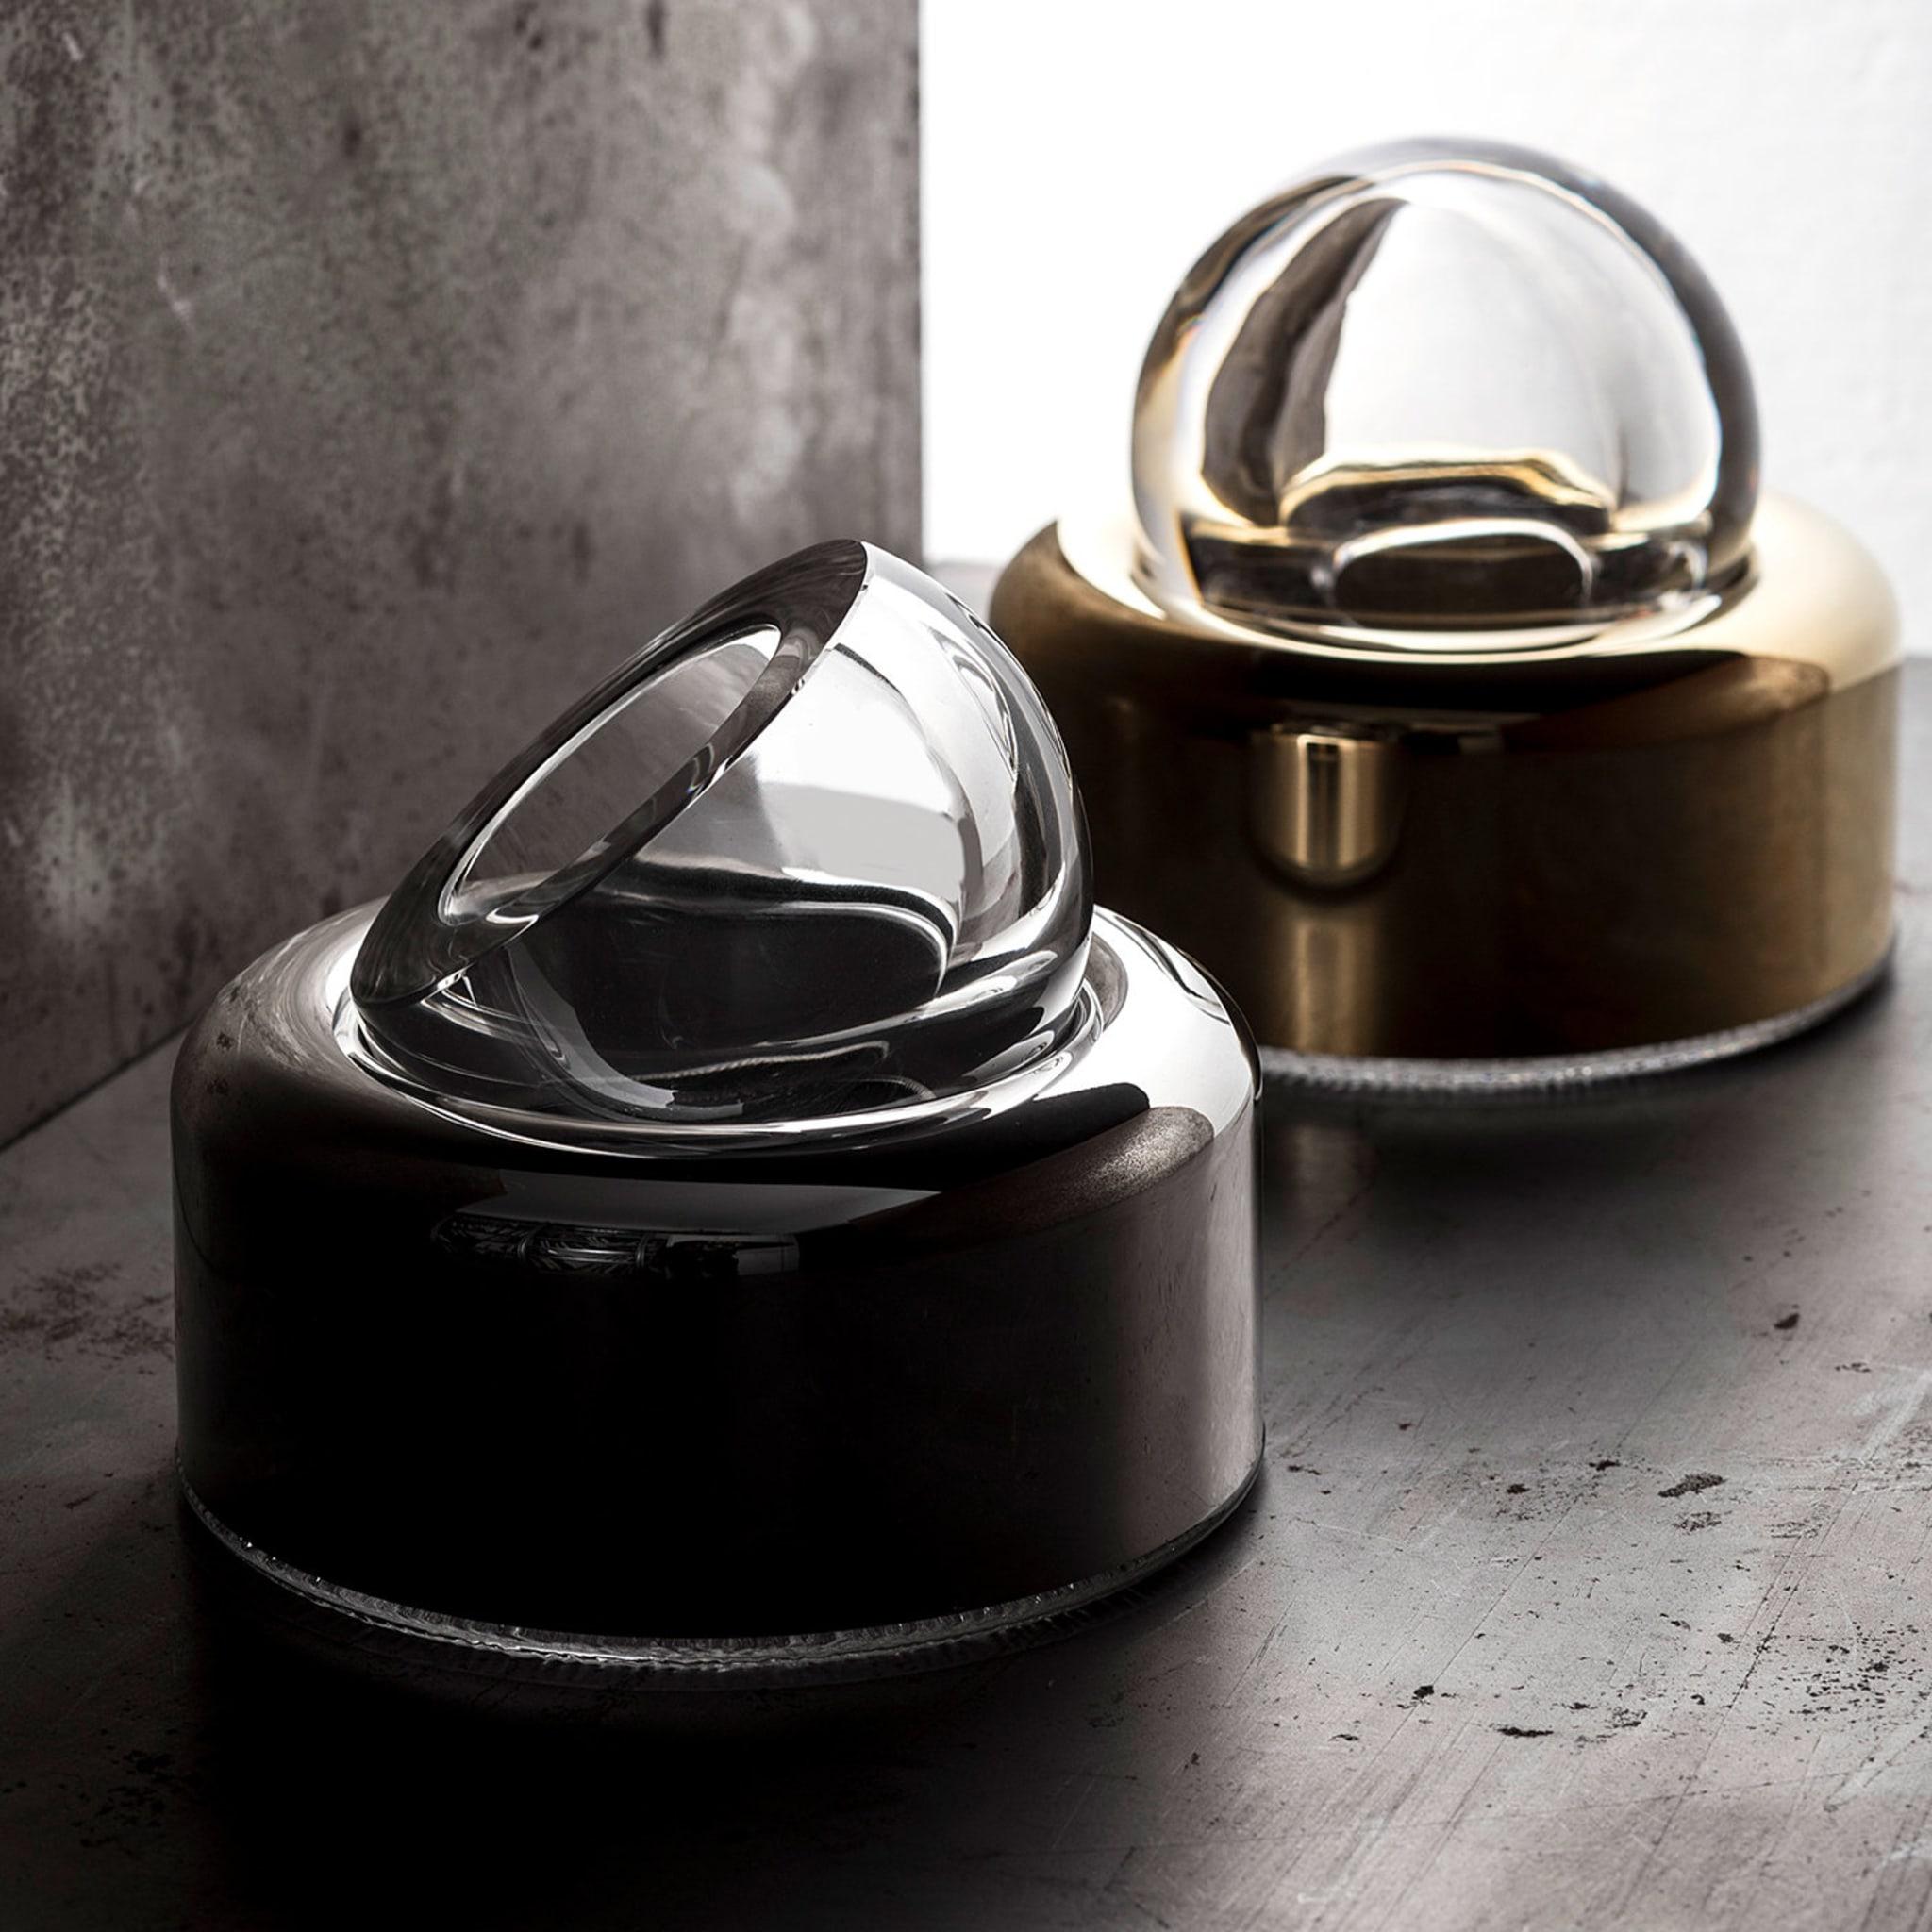 Designed in 1963 by Joe Colombo, this ashtray is part of the Biglia Collection, whose design is centered on the perfect volume of a marble sphere. The top part, made of transparent crystal, rests on a metal base with a gold plating that adds a